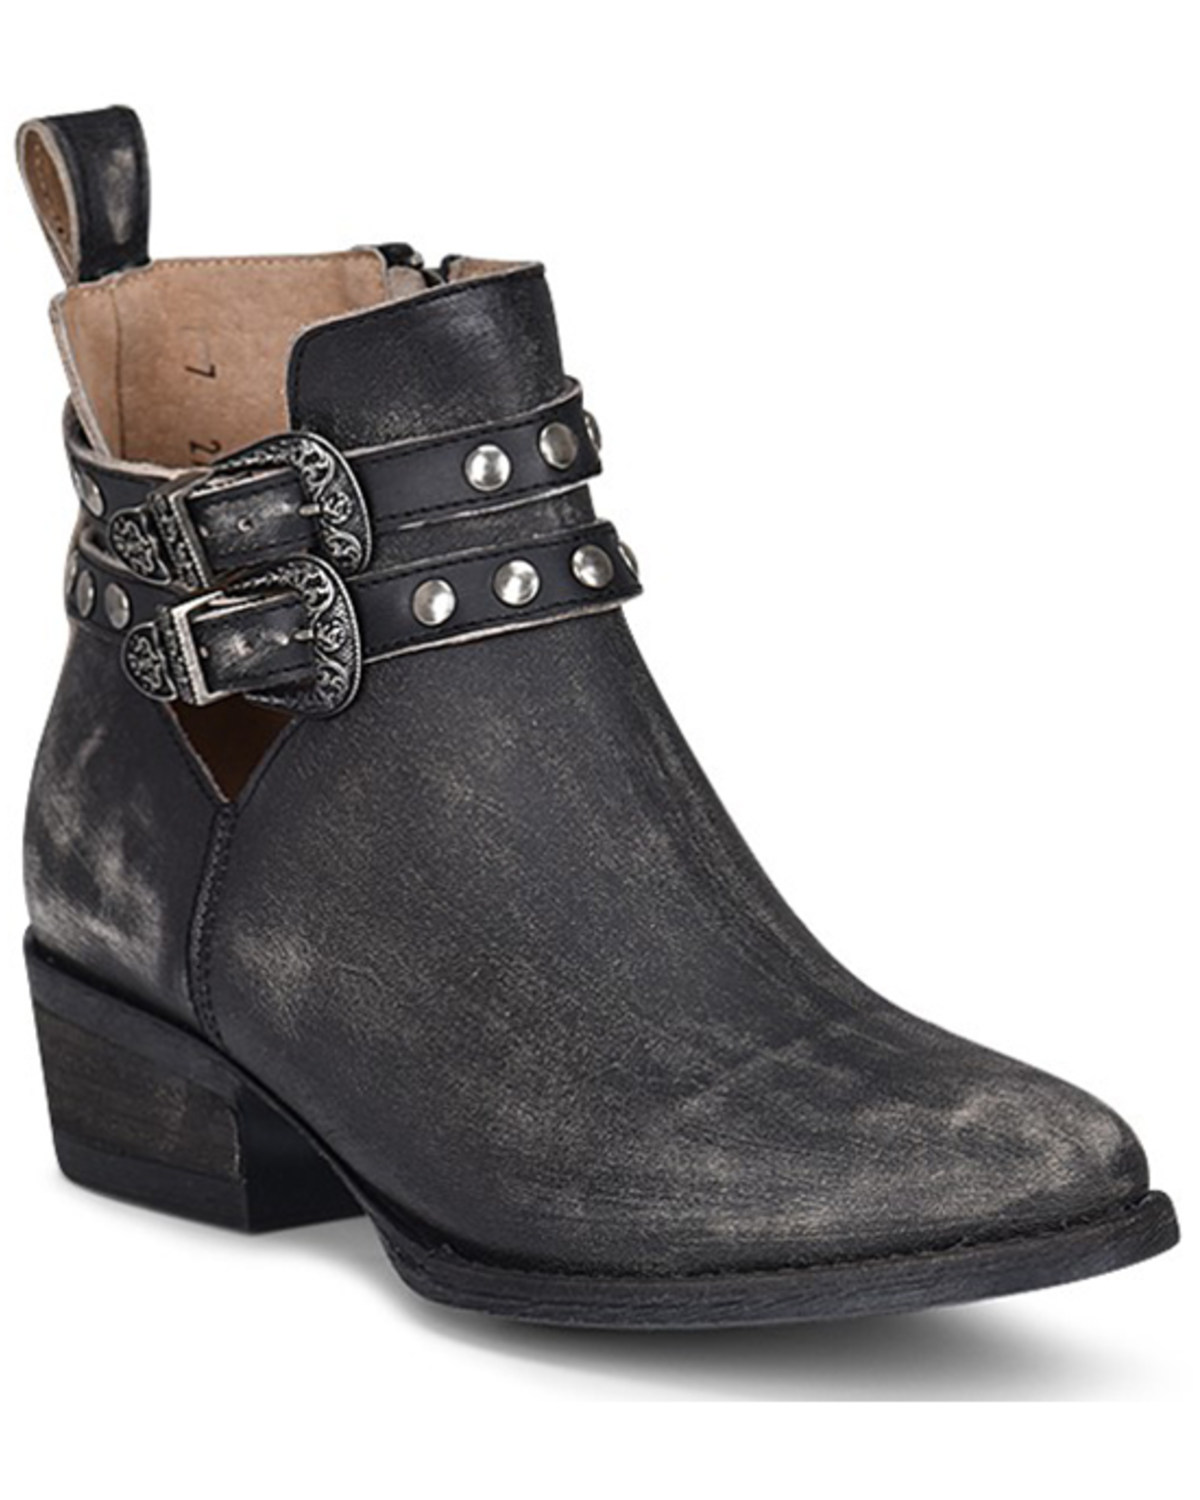 Corral Women's Studded Harness Booties - Round Toe